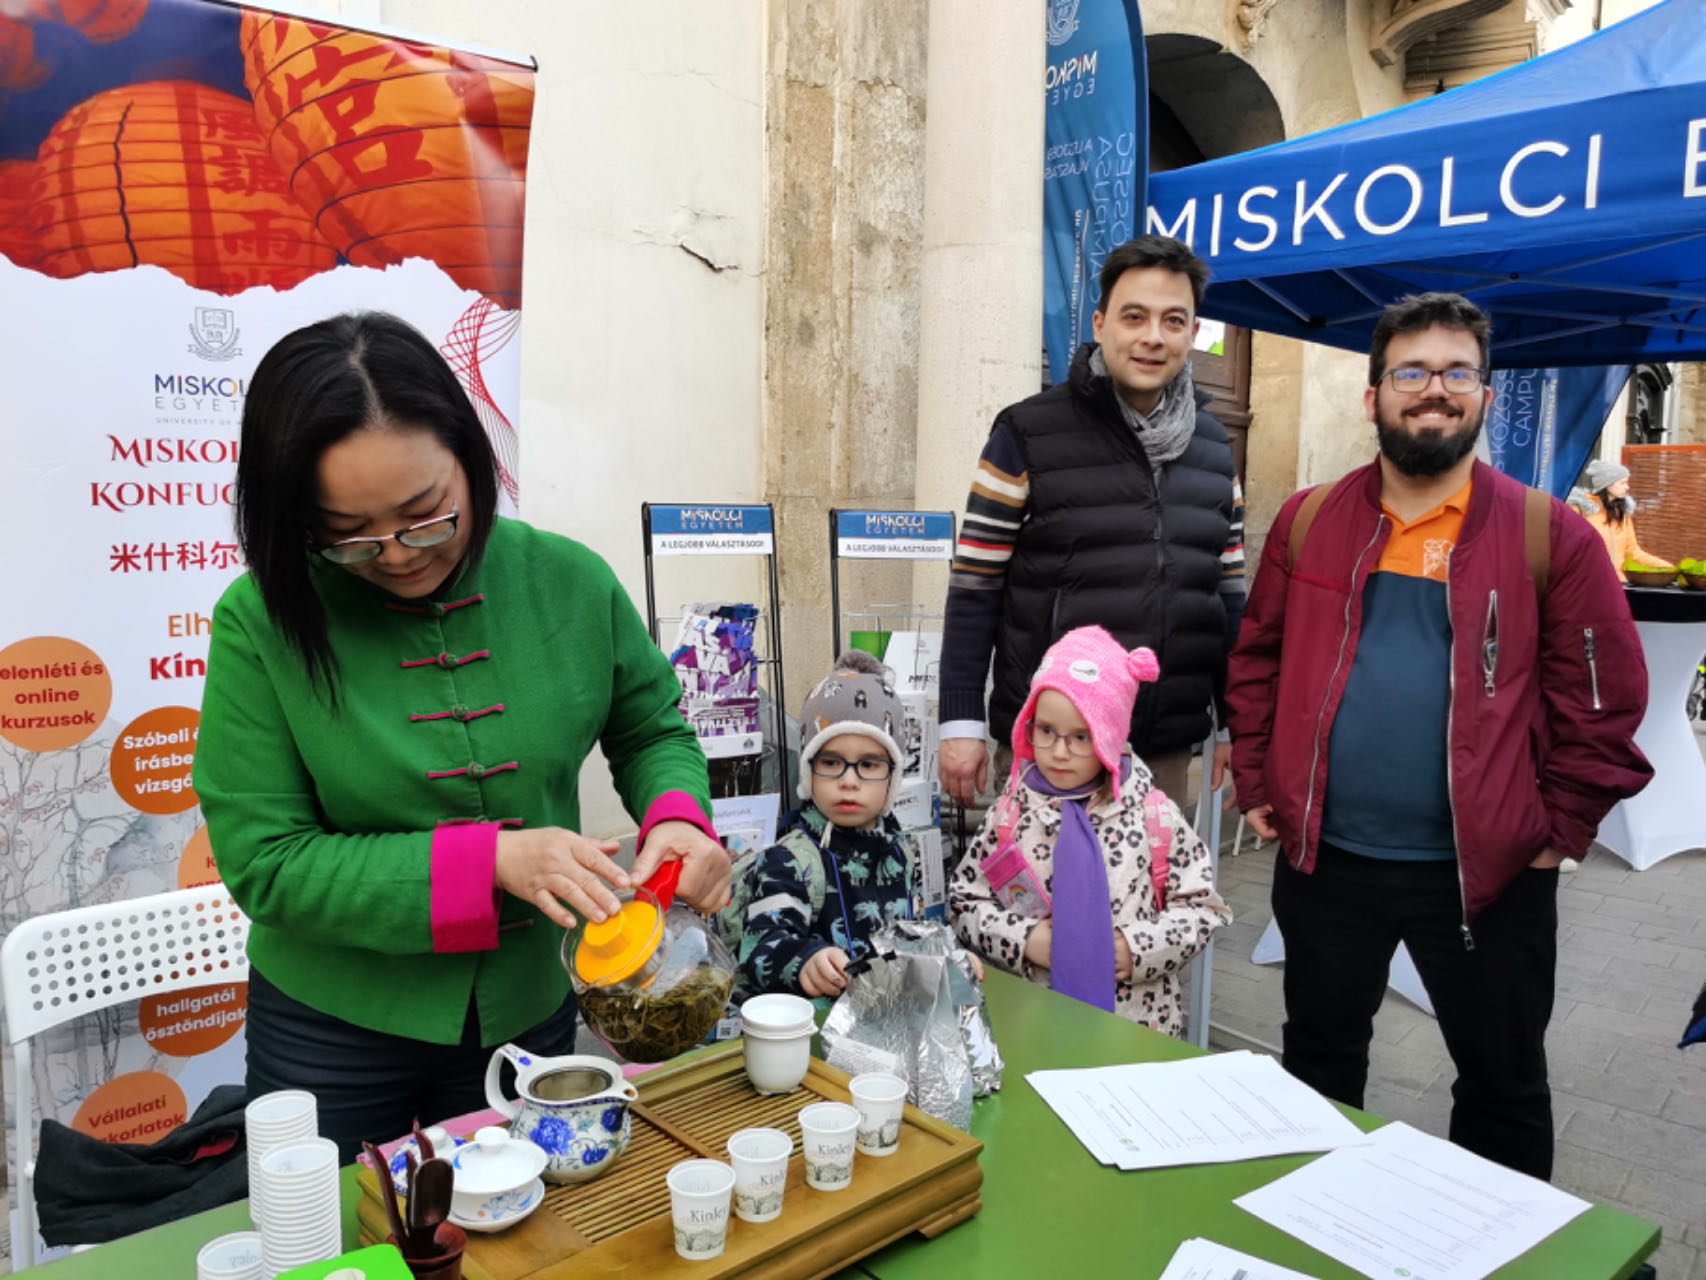 Fan Liyun makes tea for visitors to her booth during an event celebrating the Kocsonya Festival in Miskolci, Hungary, March 6, 2023. /courtesy of Fan Liyun